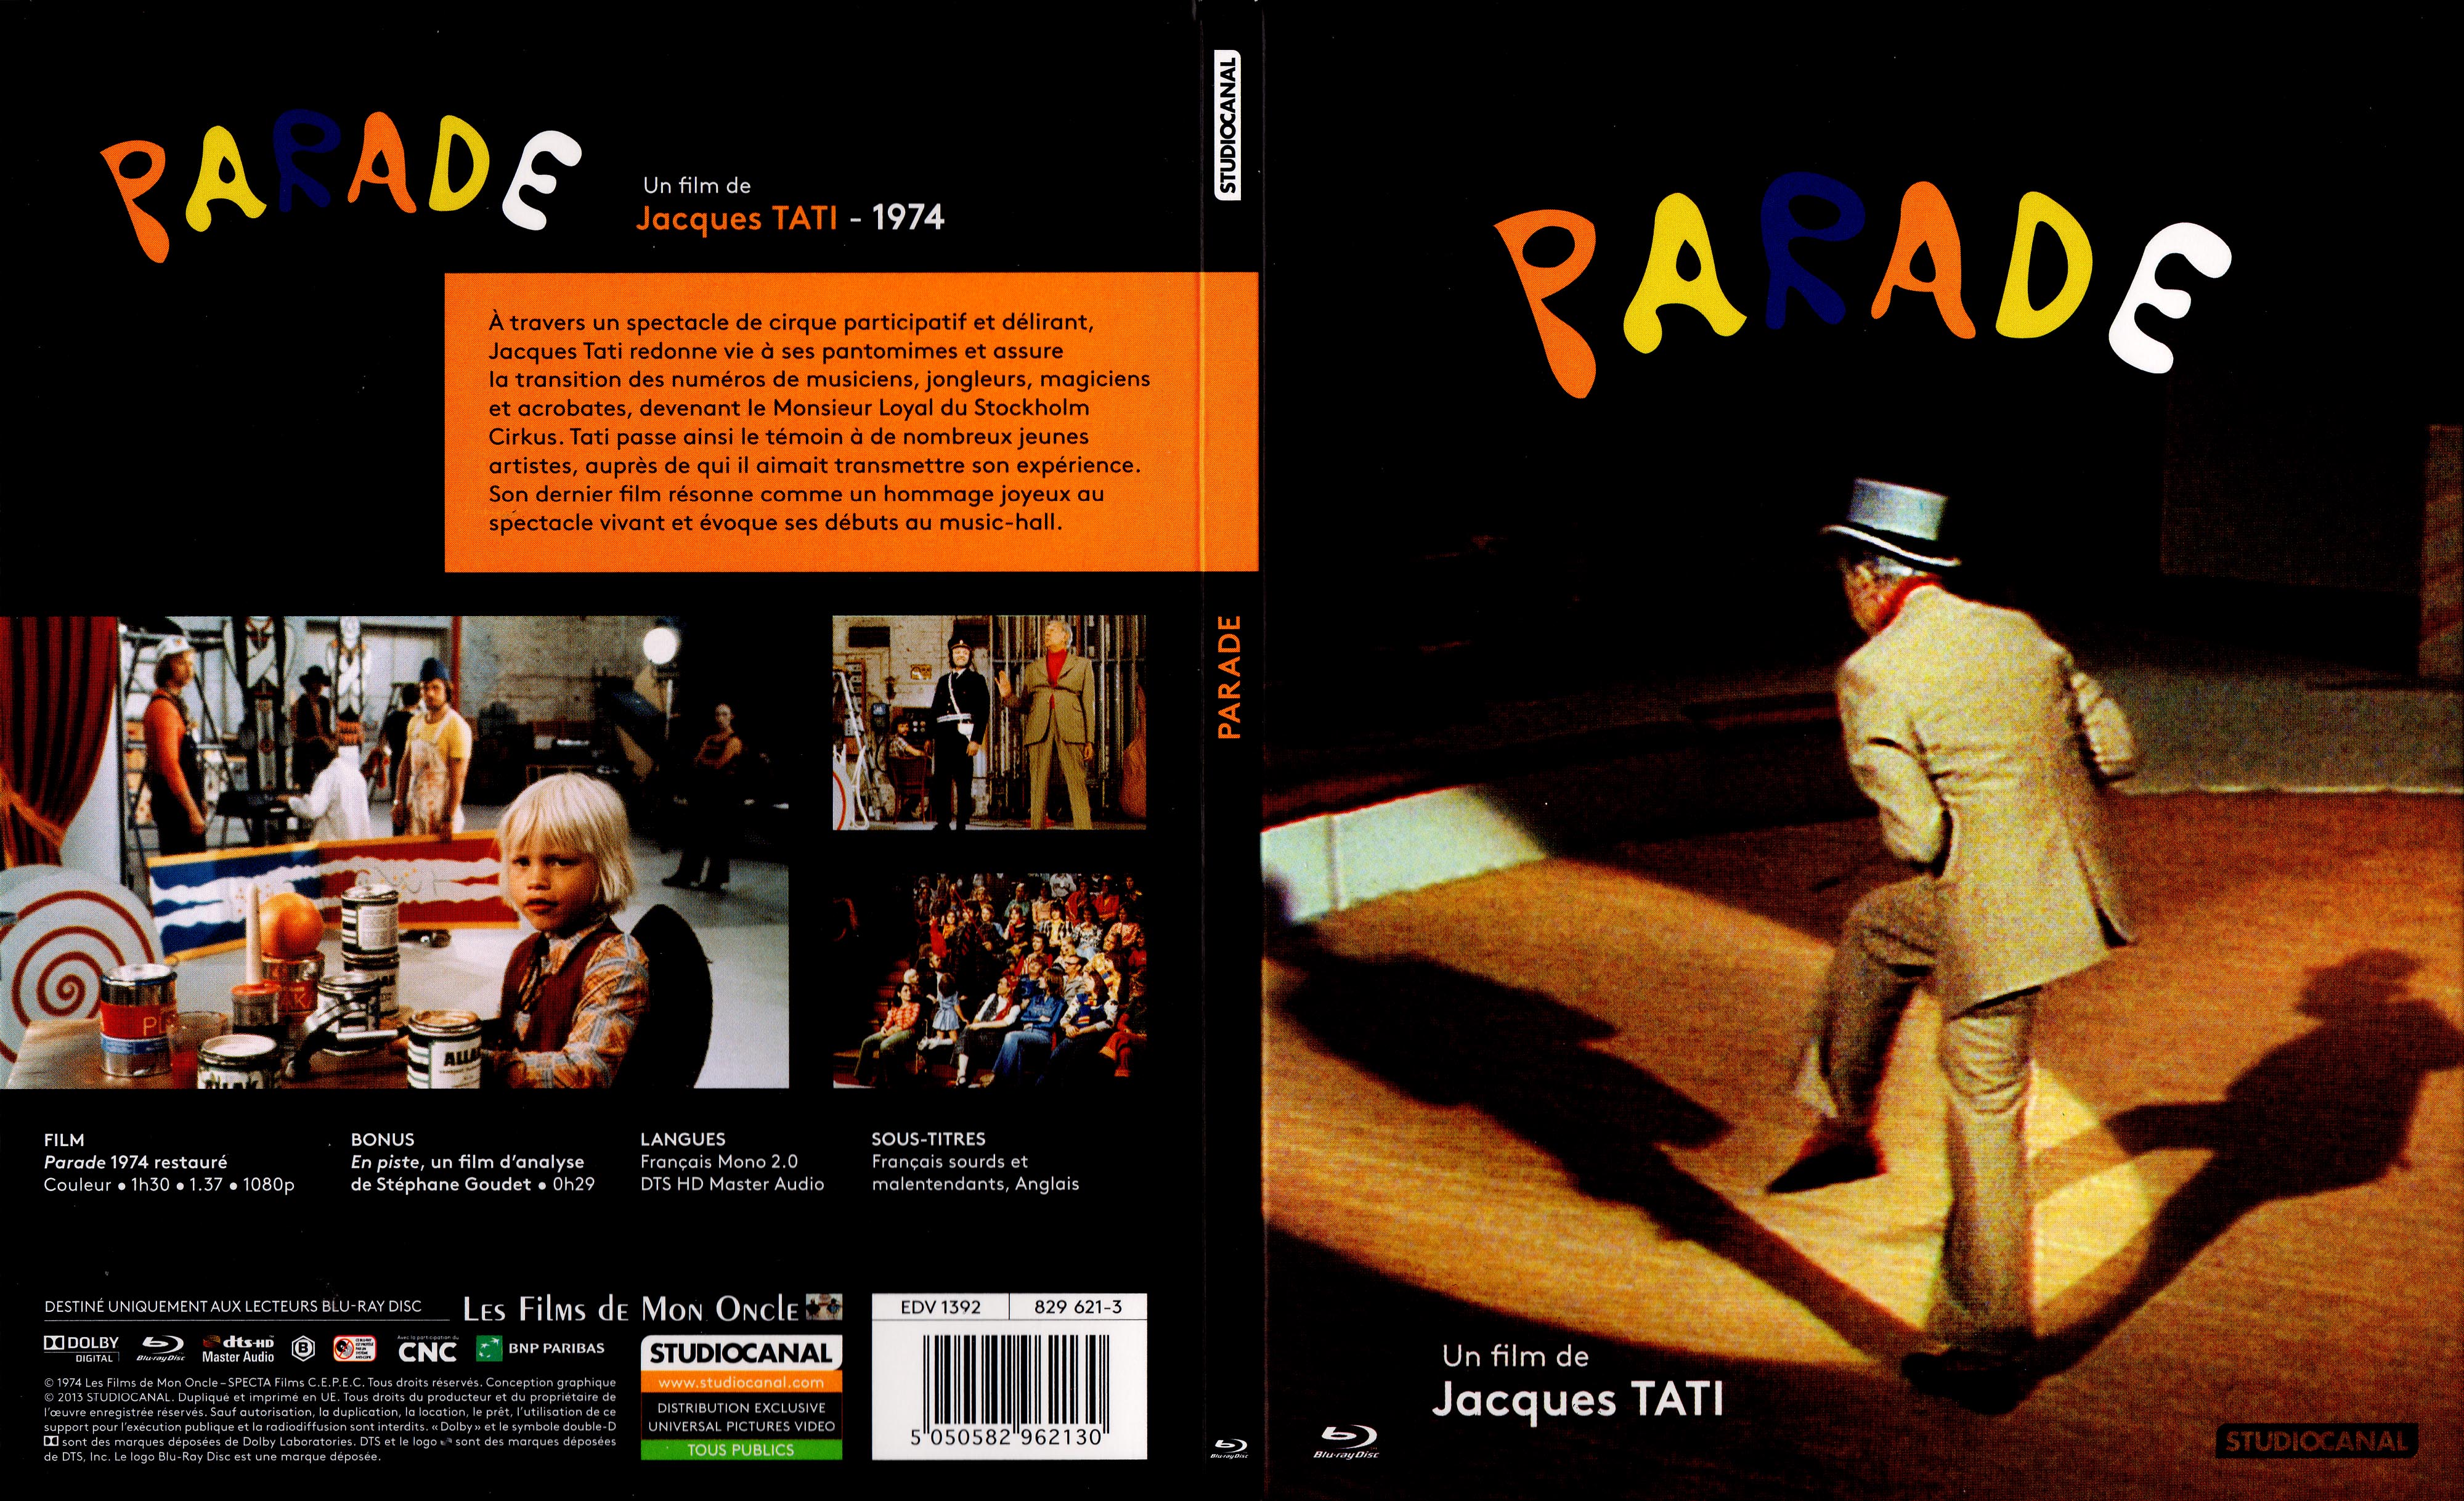 Jaquette DVD Parade (BLURAY)